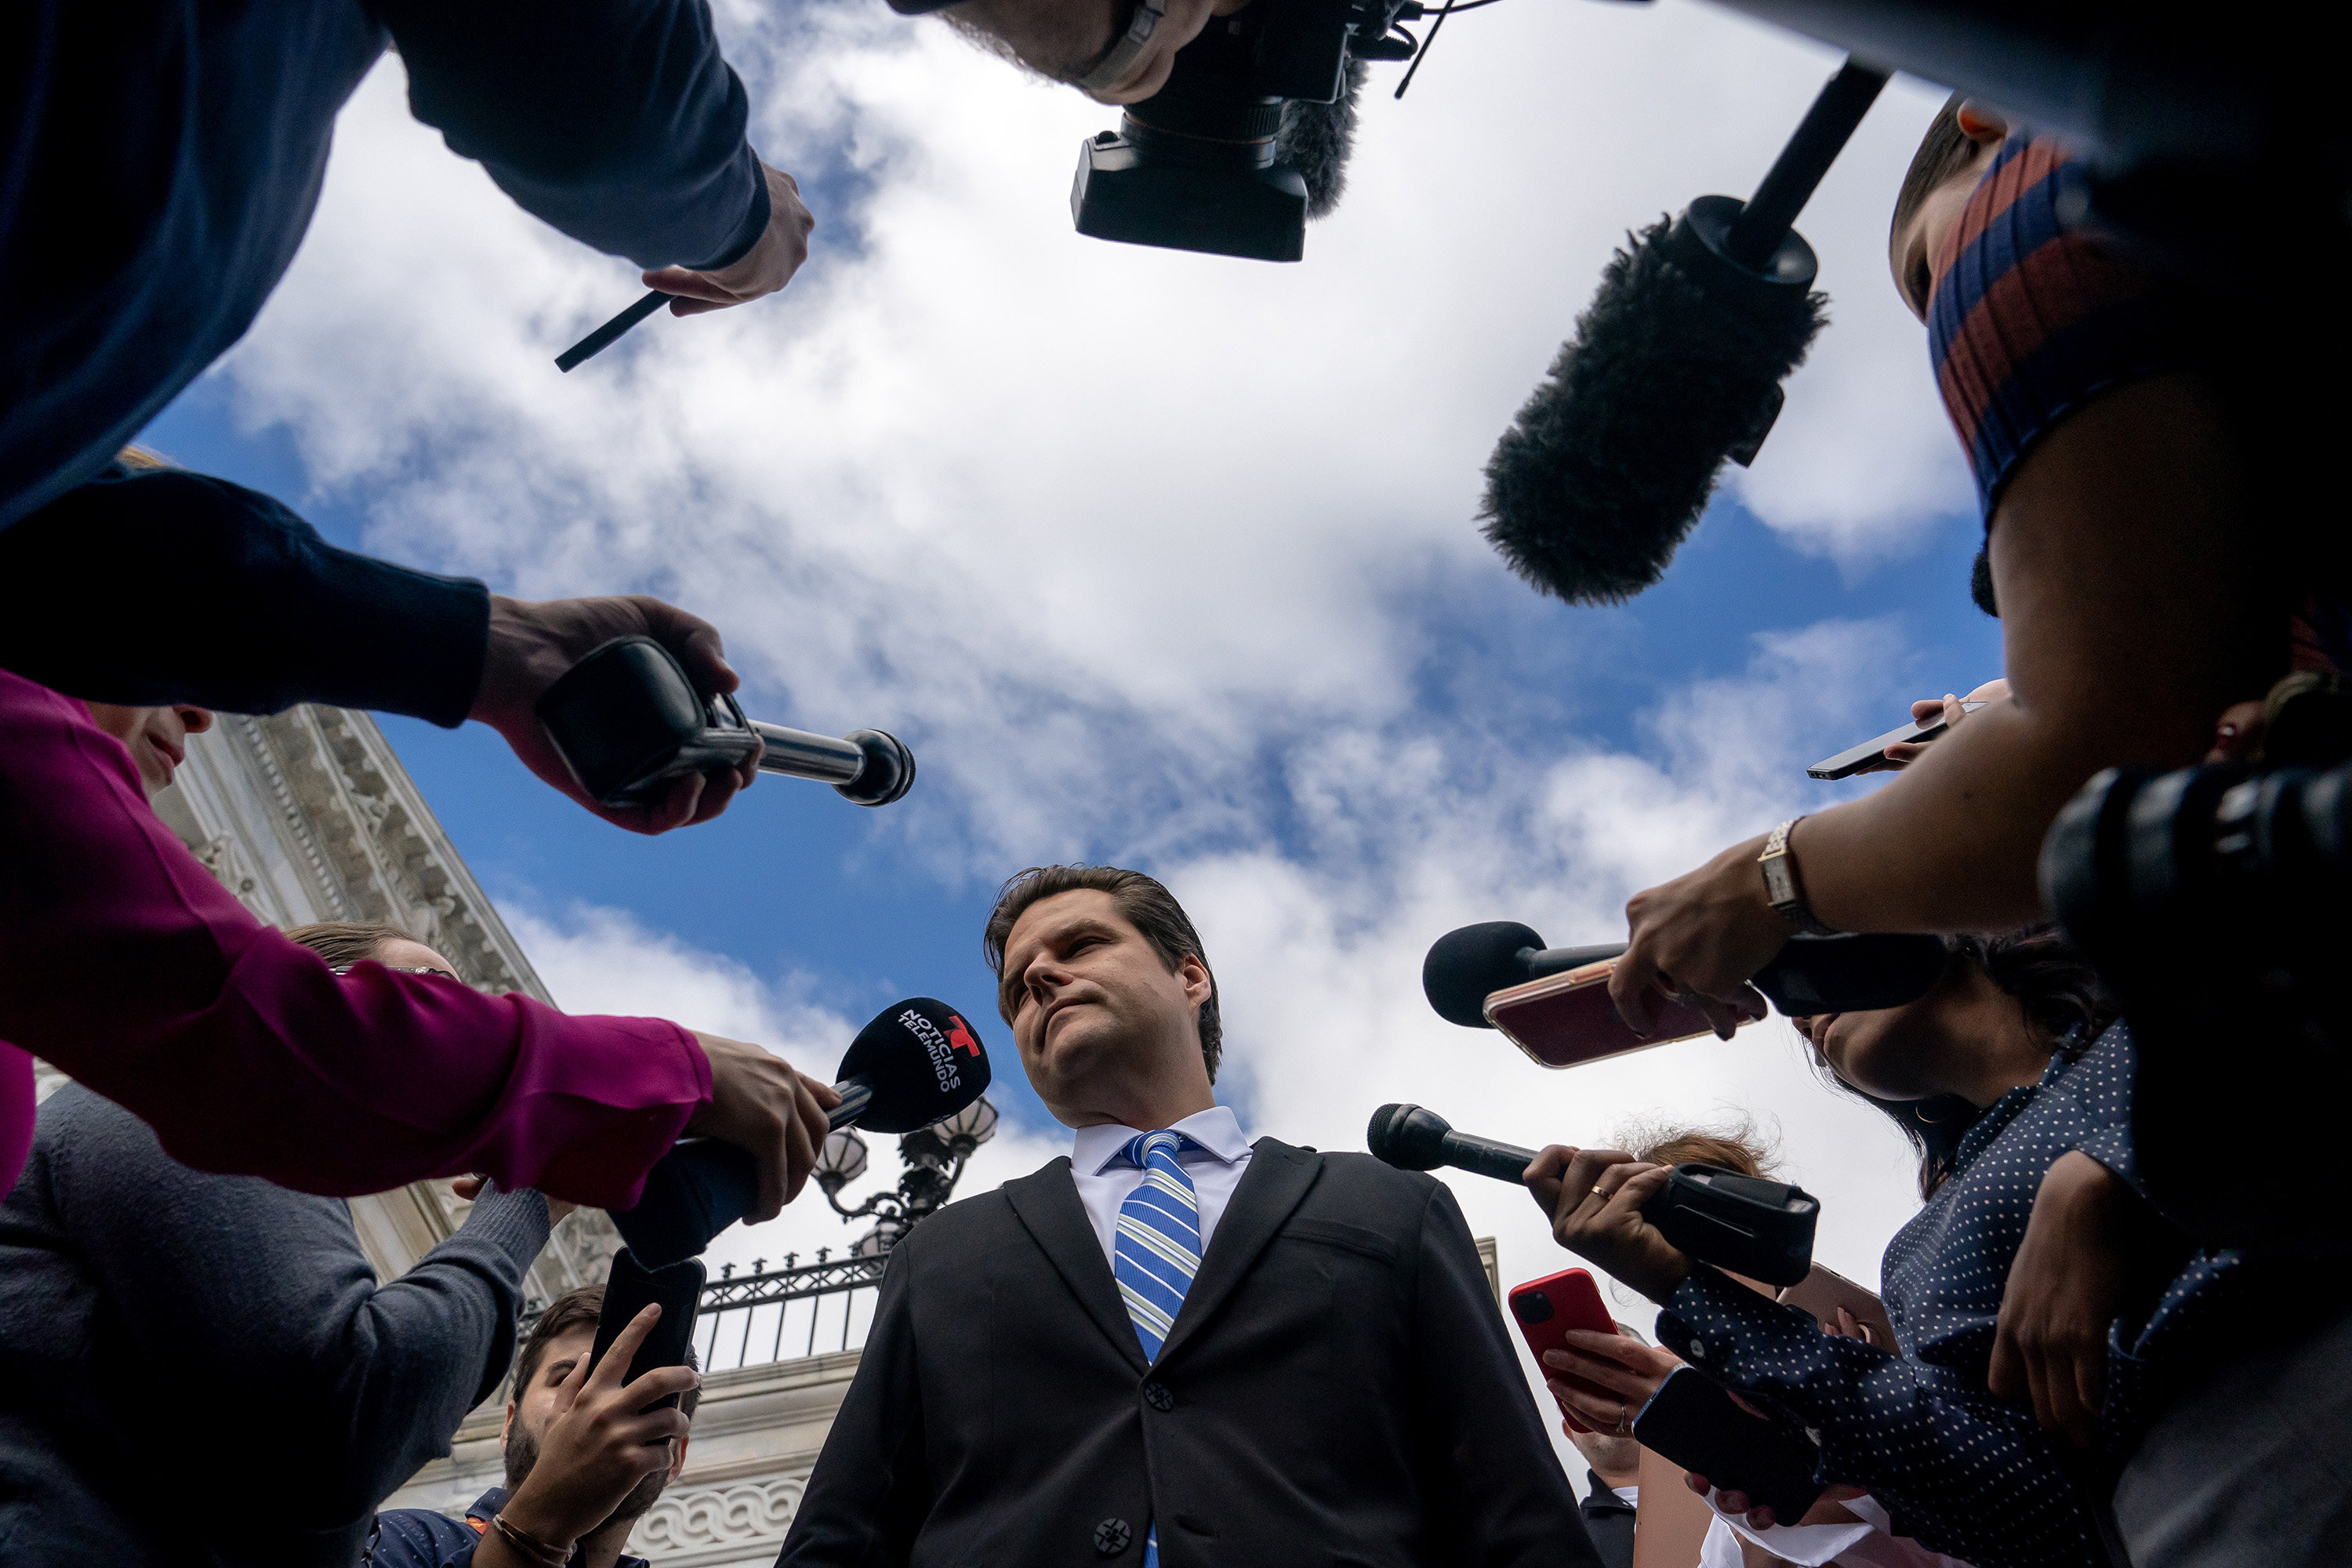 Matt Gaetz calls himself the ‘Trumpiest congressman’ and said last month he frequently talks with the former president. Photo: TNS